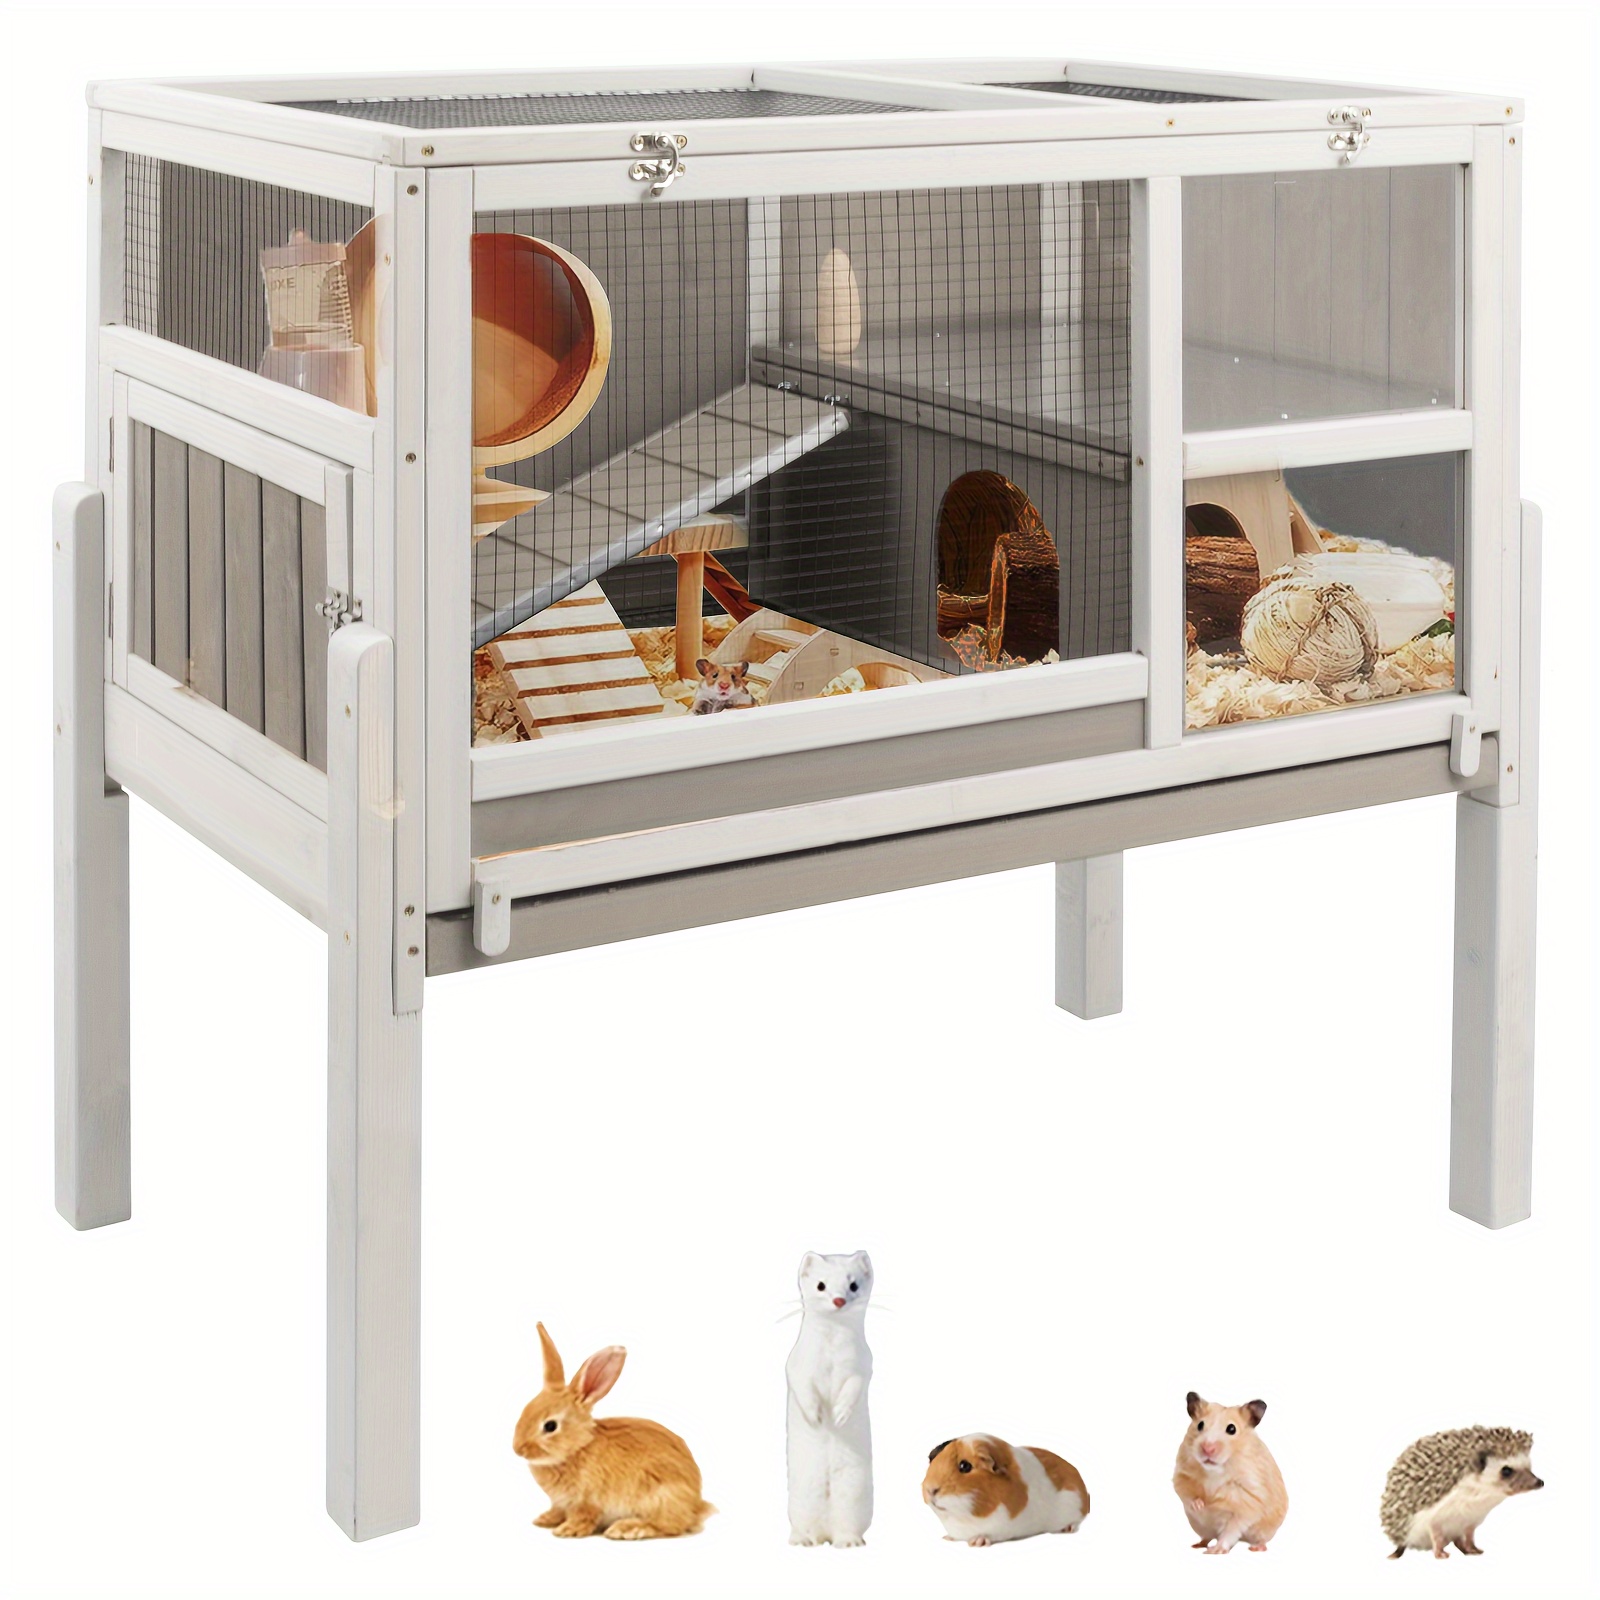 

Gowoodhut Elevated Rabbit Hutch Indoor 36.6" H Wooden Outdoor Bunny Hutch With Wire Netting Above The Pull Out Tray, Detachable Legs Hamster Cavy Cage Pet House For Small Animals, Grey